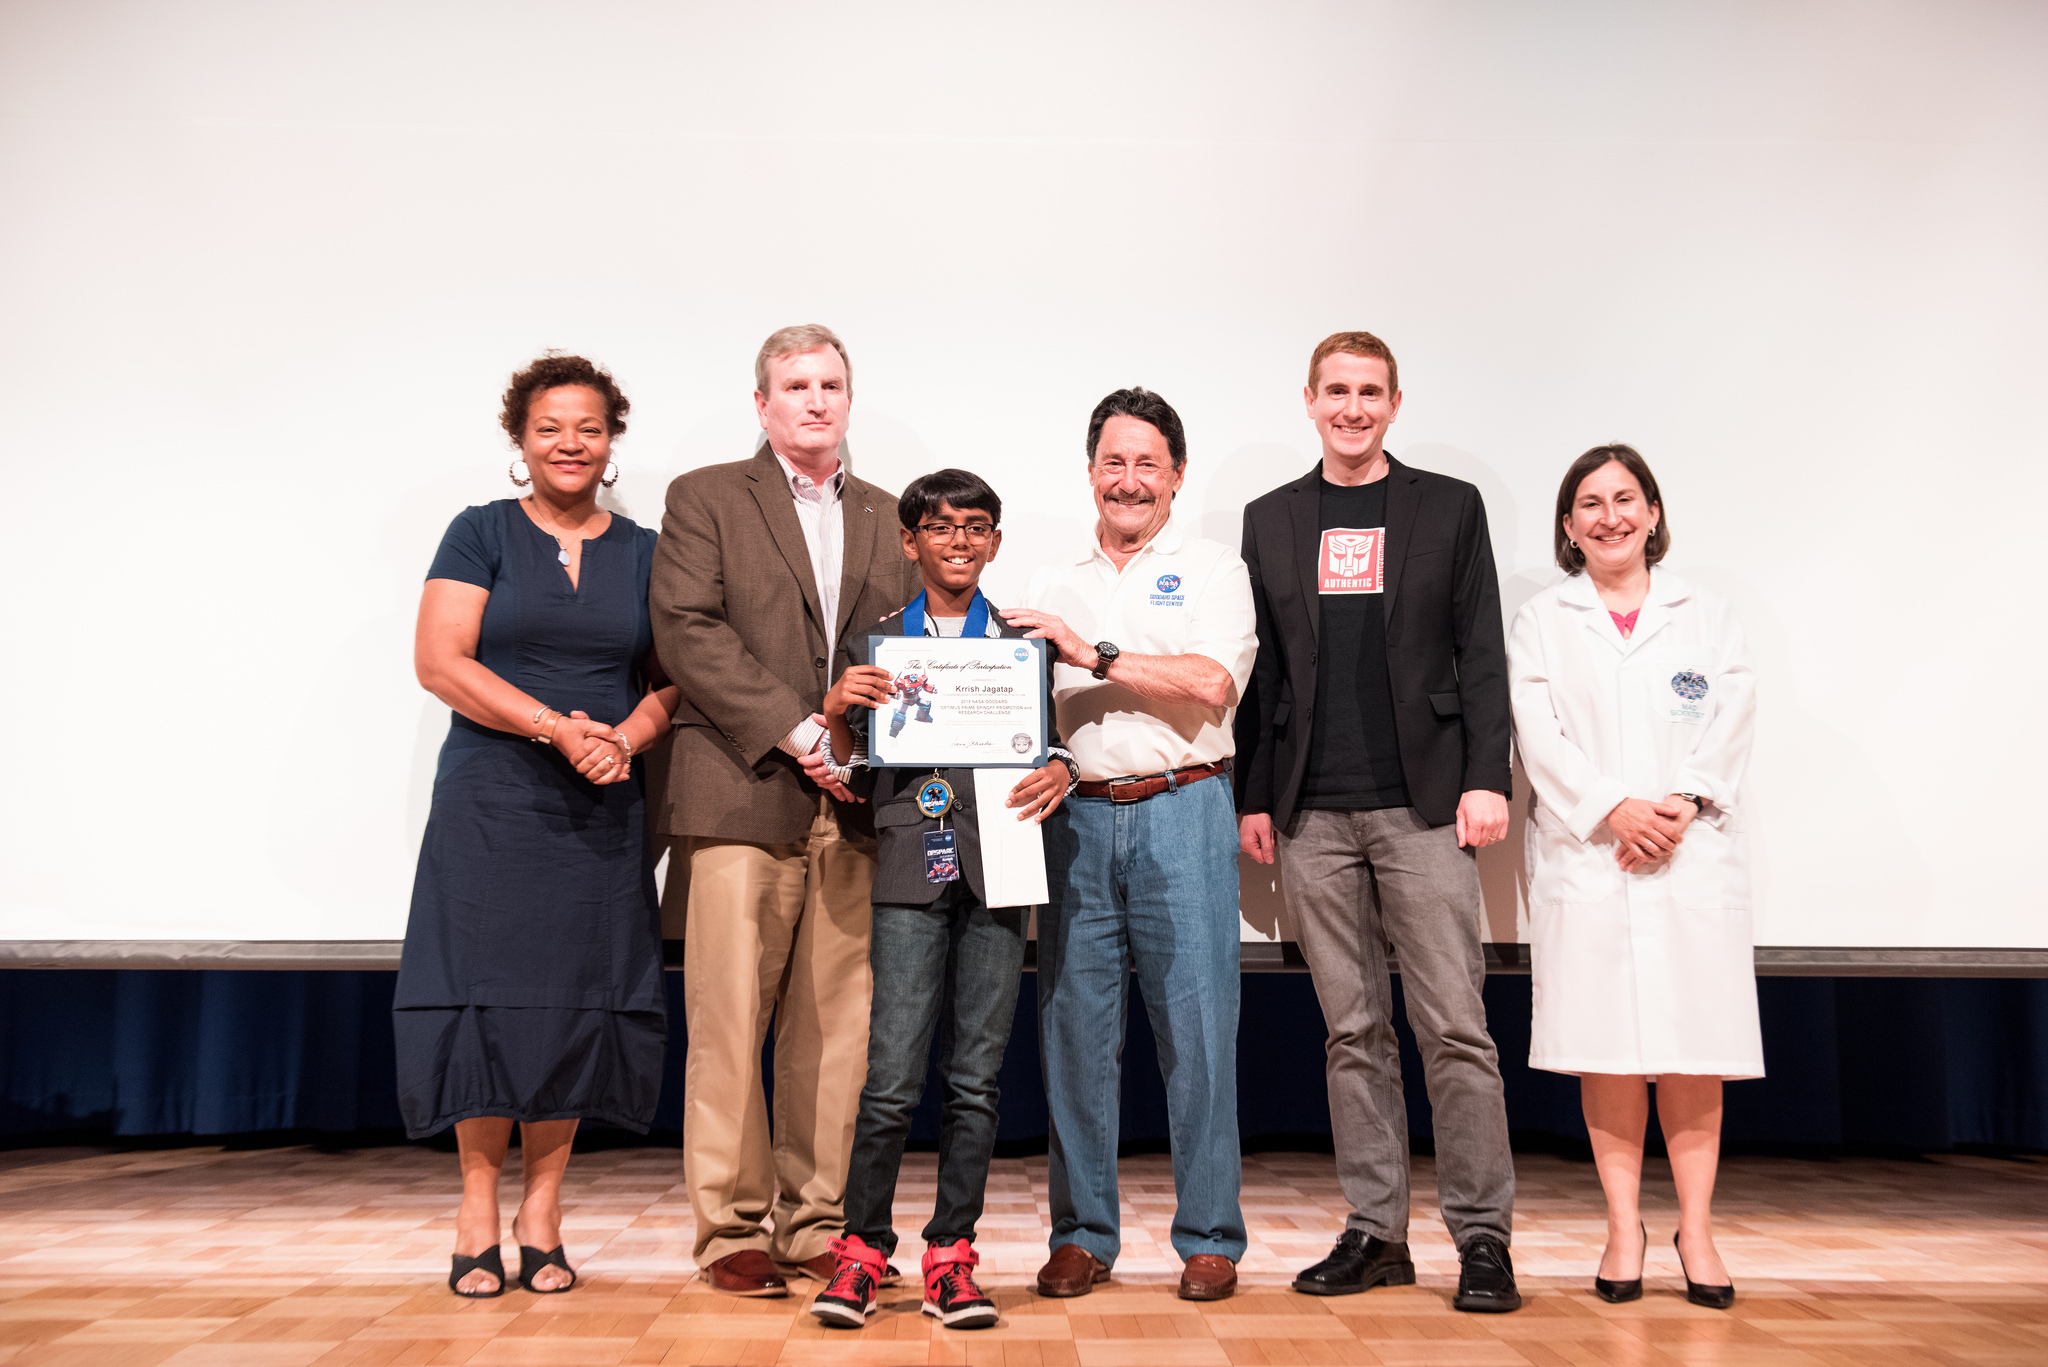 Fifth grader Krrish Jagatap won first place in the elementary age group of OPSPARC 2018.